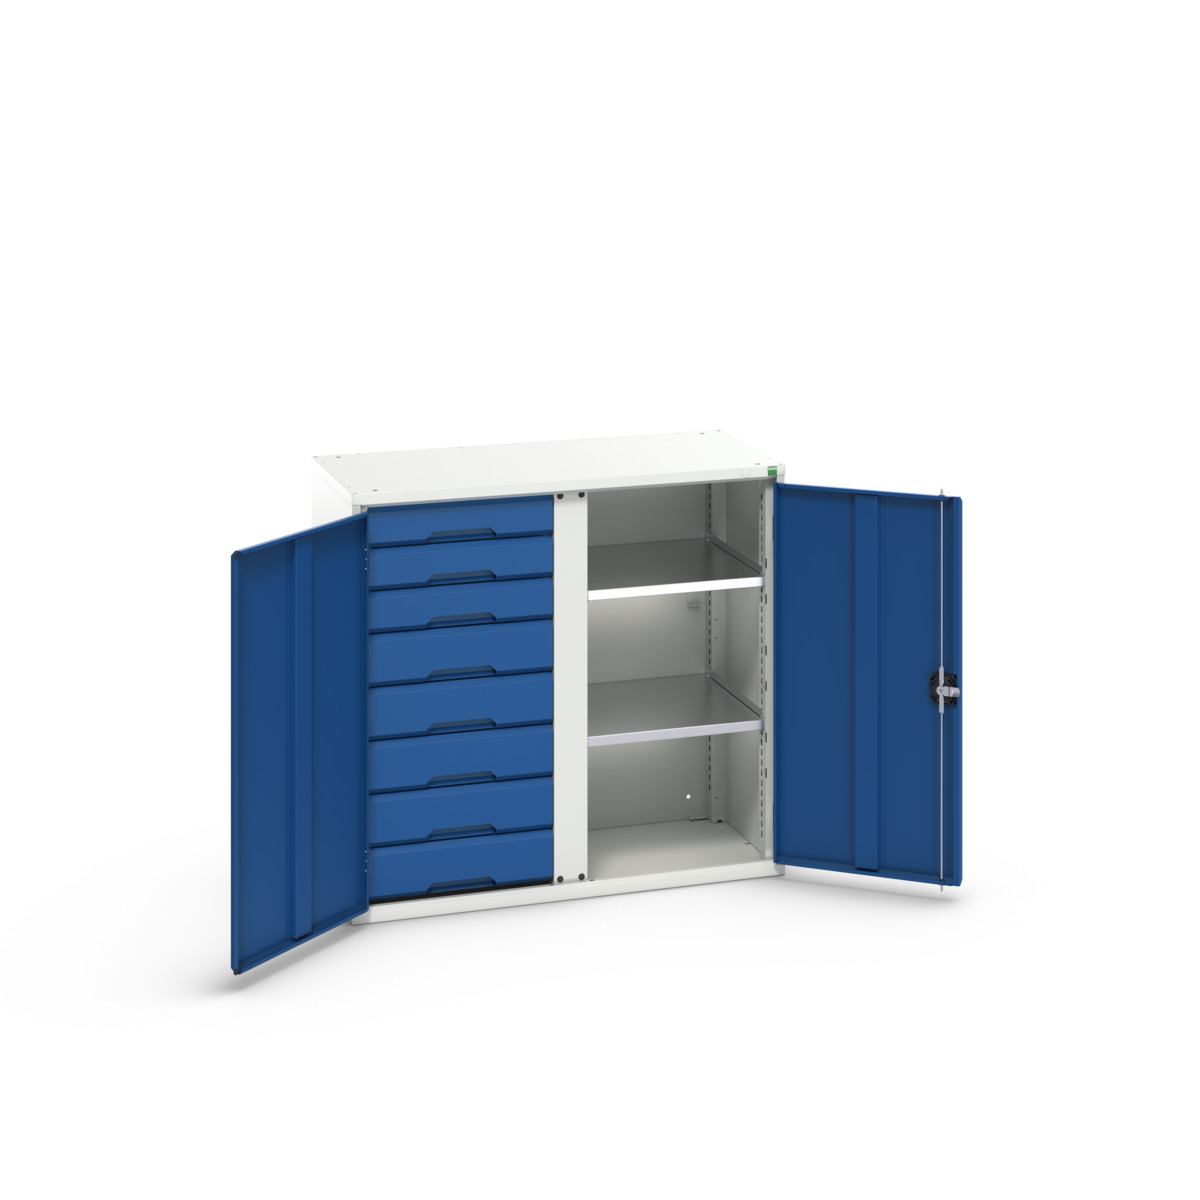 16926558.11 - verso kitted cupboard